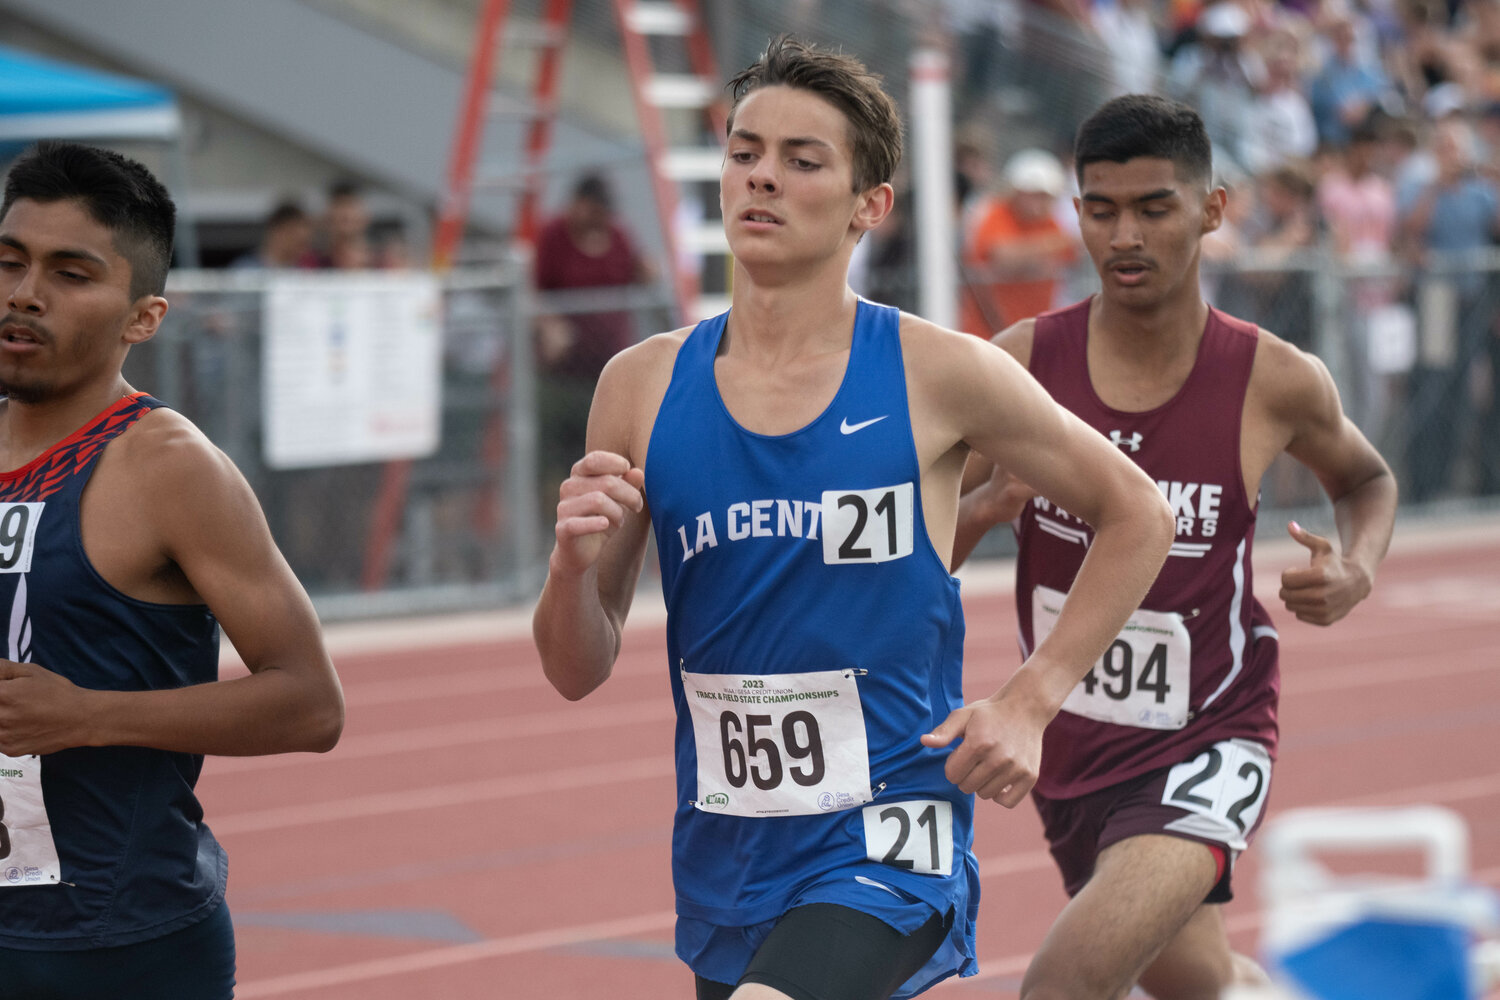 La Center's Logan Hubler runs in the 1,600-meter finals at the 1A state championships at Zaepfel Stadium in Yakima on May 25.